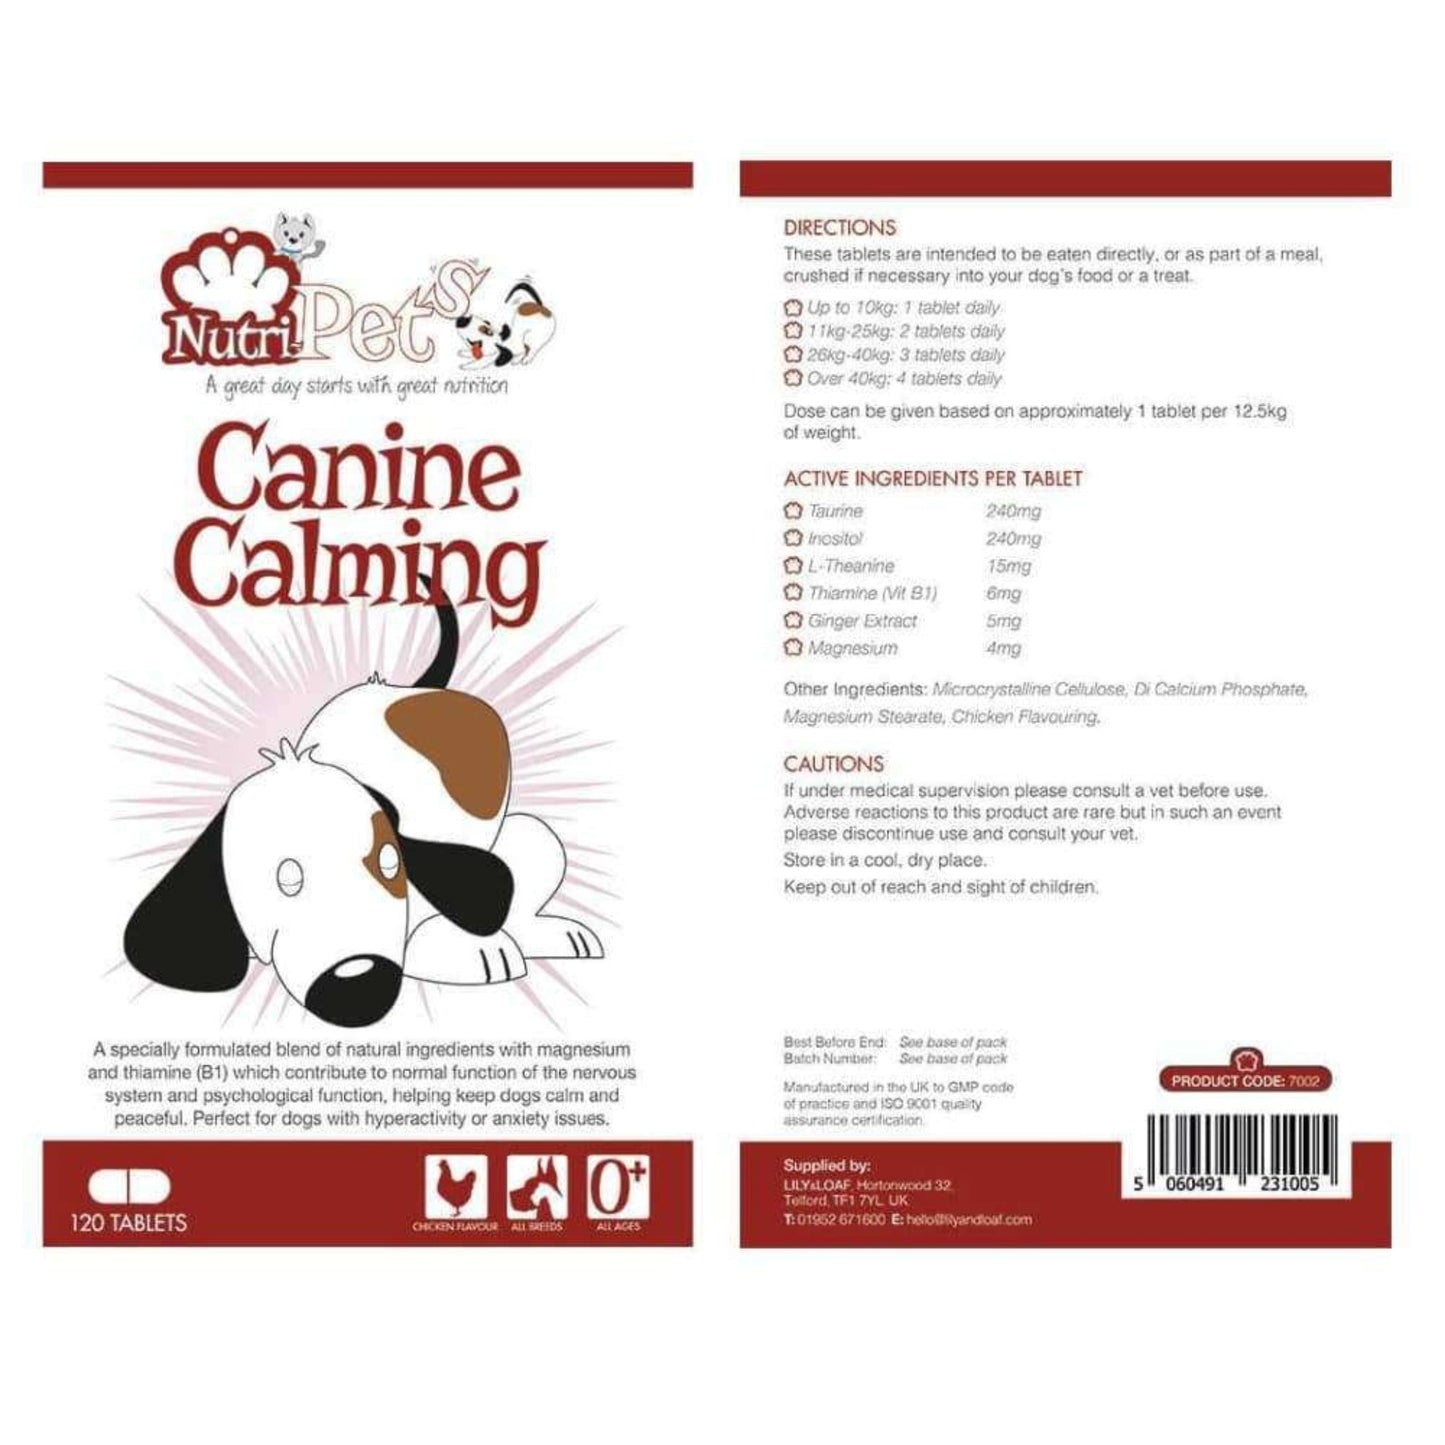 Nutri-Pets Canine Calming label highlighting directions for use and ingredients